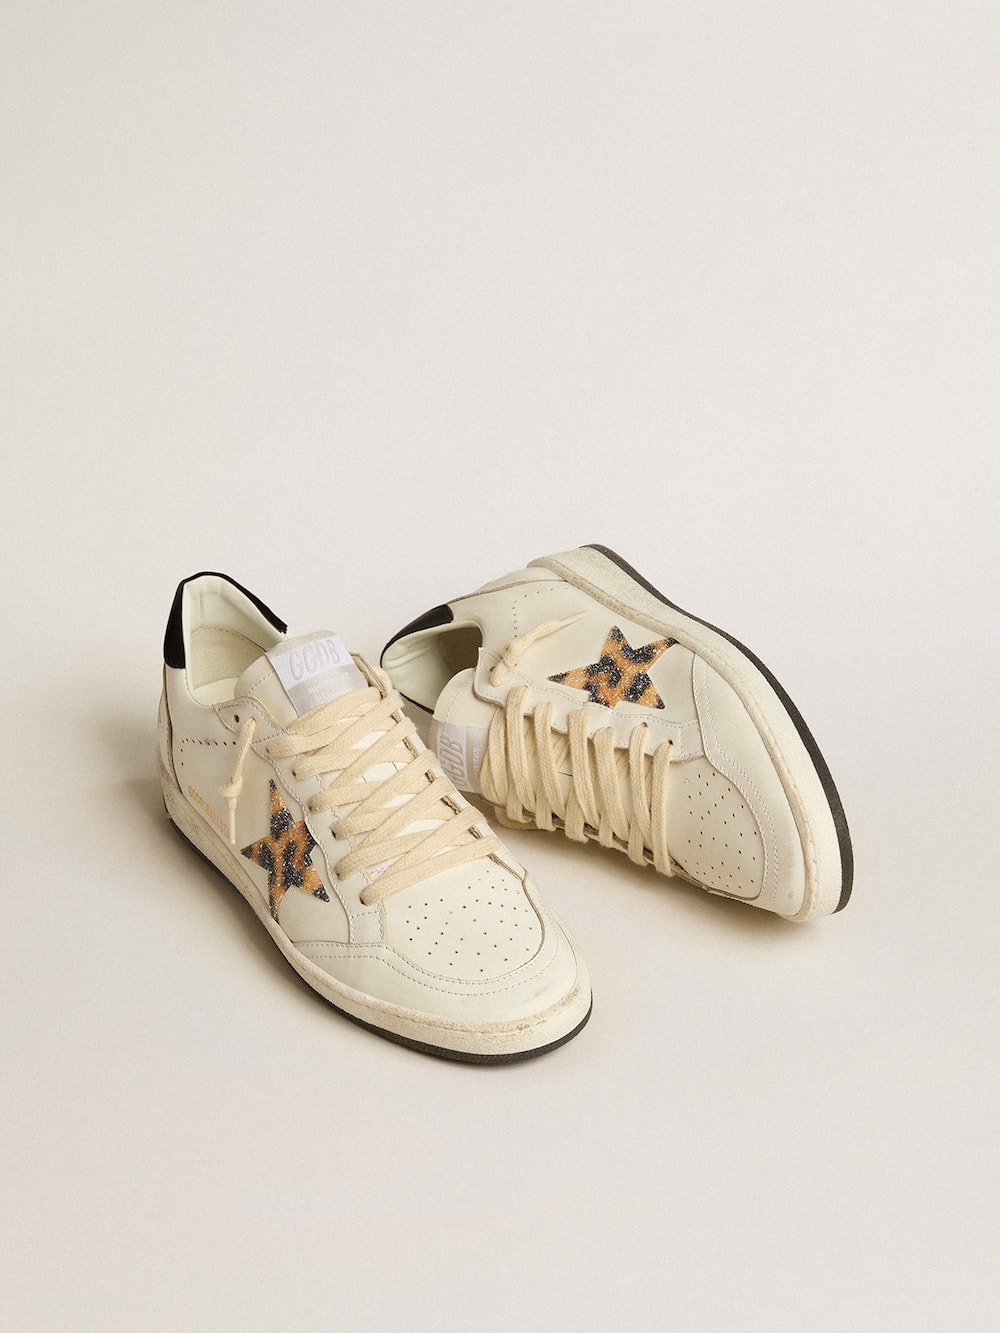 Golden Goose - Women’s Ball Star with leopard-print star embellished with Swarovski crystal in 